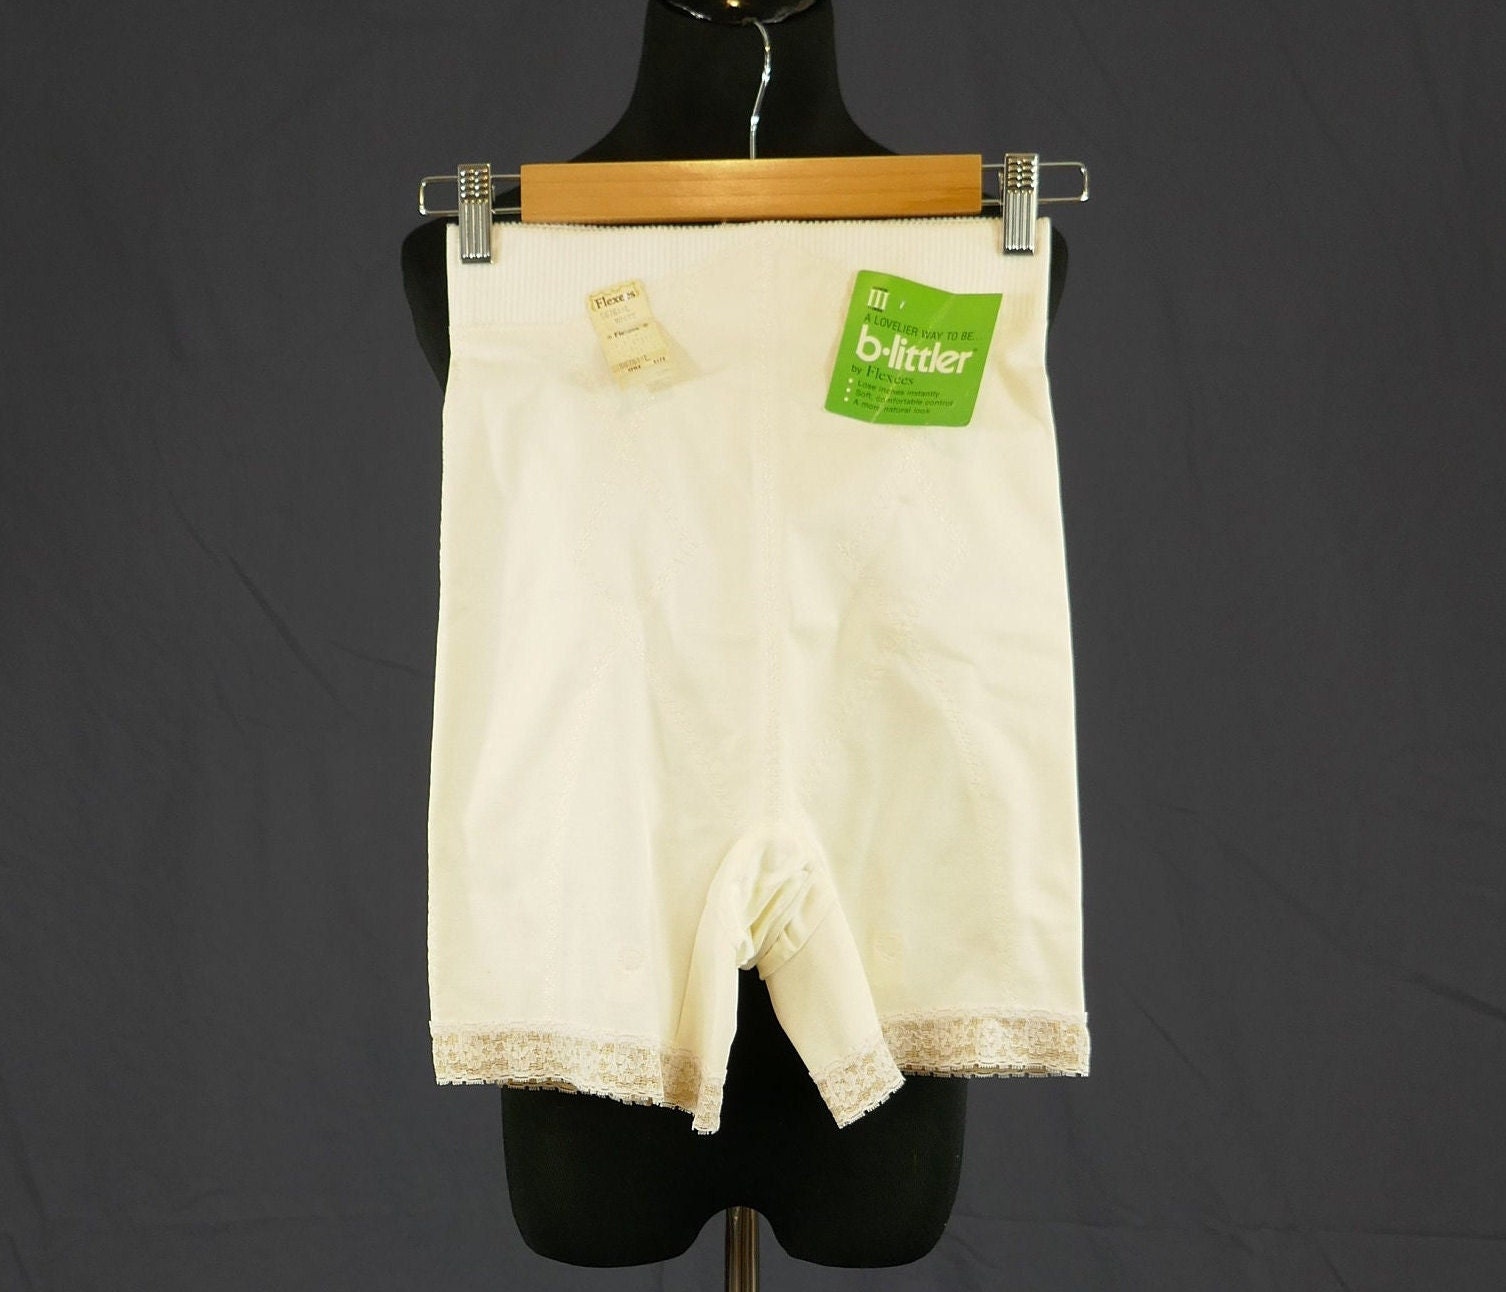 Flexees Women's Gurdle White Size M - $10 New With Tags - From Suzanne